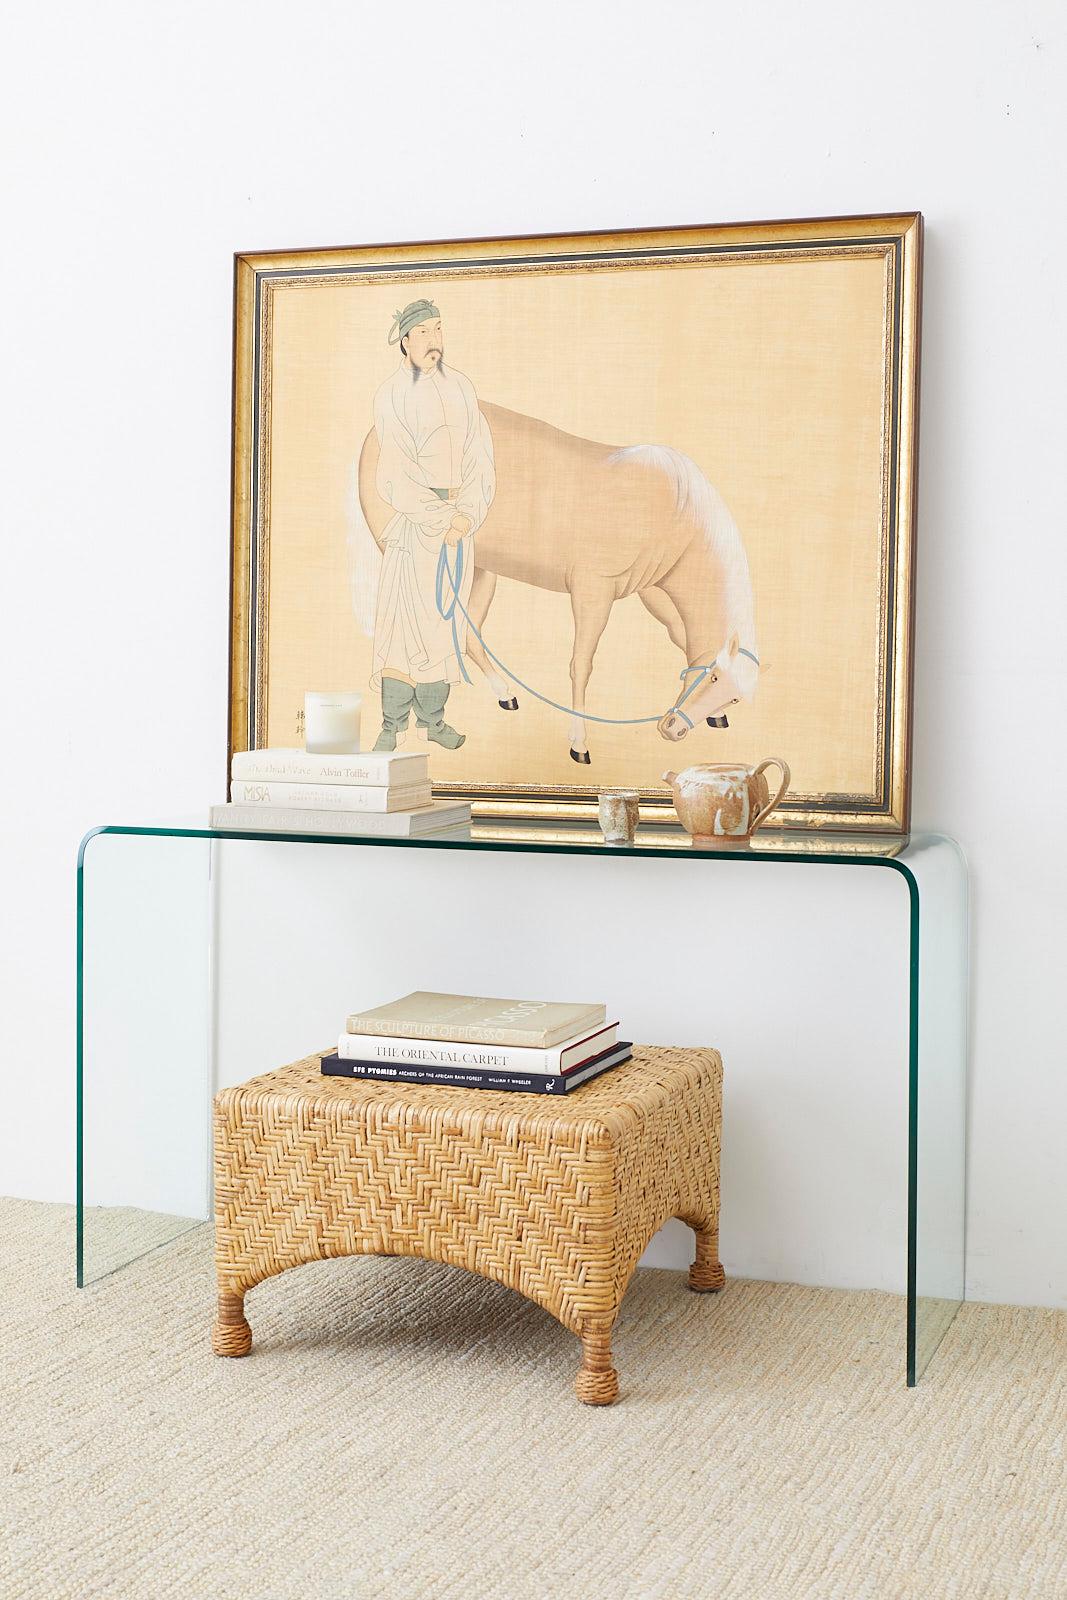 Stunning Italian glass waterfall console table or writing table designed by Angelo Cortesi for Fiam Italia. Minimalist Postmodern design from .5 inch thick extra clear bent crystal glass. Beautifully constructed and amazing to view in person. Also